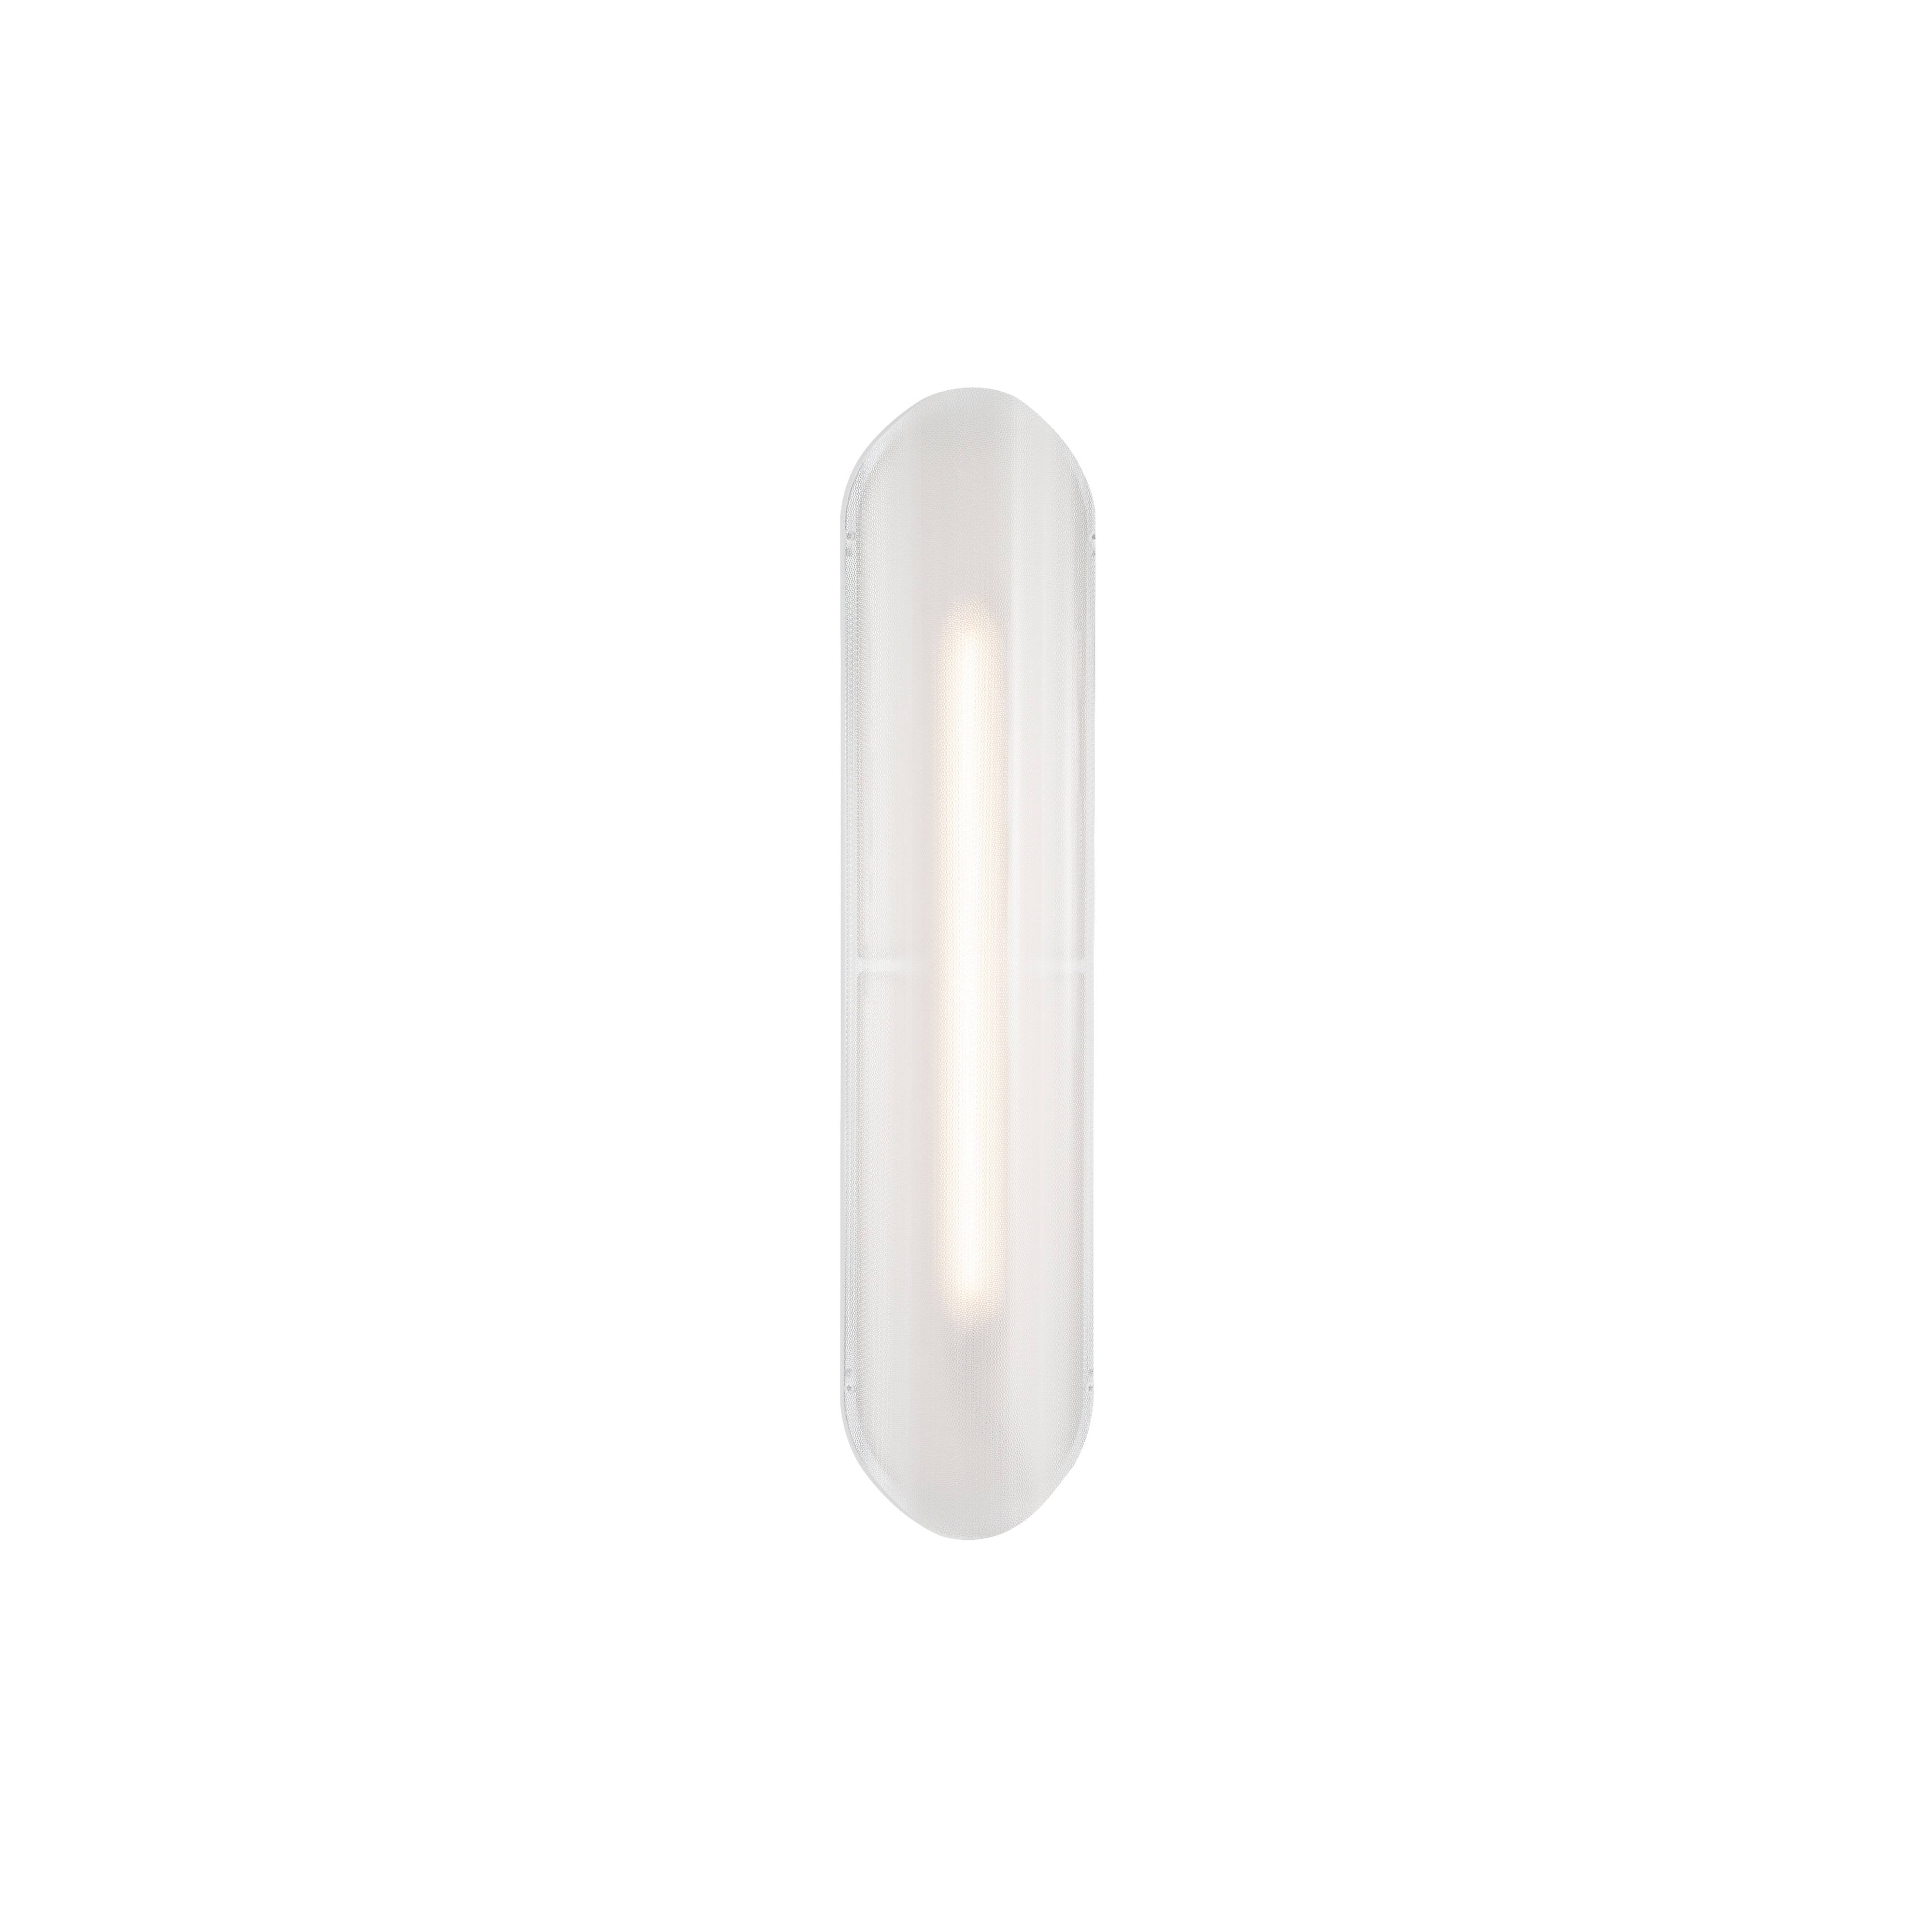 Vale System Ceiling/Wall Light: Vertical + Side-to-Side + Vale 1